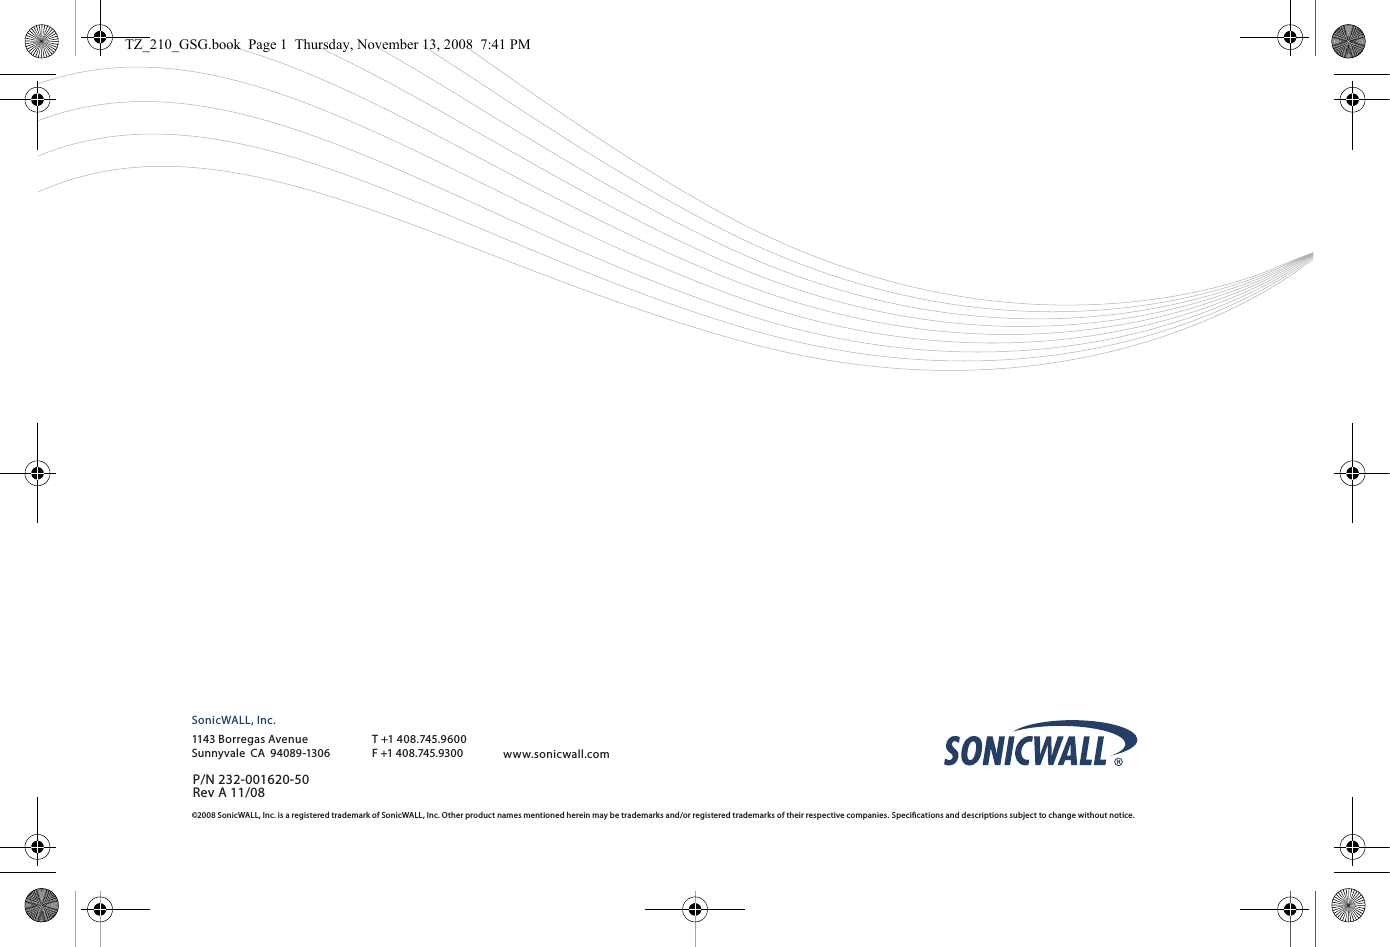 ©2008SonicWALL,Inc.is aregisteredtrademarkofSonicWALL,Inc.Otherproductnamesmentionedhereinmaybetrademarksand/orregisteredtrademarks of their respective companies. Specications and descriptions subject to change without notice.SonicWALL, Inc.1143 Borregas Avenue T +1 408.745.9600www.sonicwall.comSunnyvaleCA94089-1306 F+1408.745.9300P/N 232-001620-50Rev A 11/08TZ_210_GSG.book  Page 1  Thursday, November 13, 2008  7:41 PM